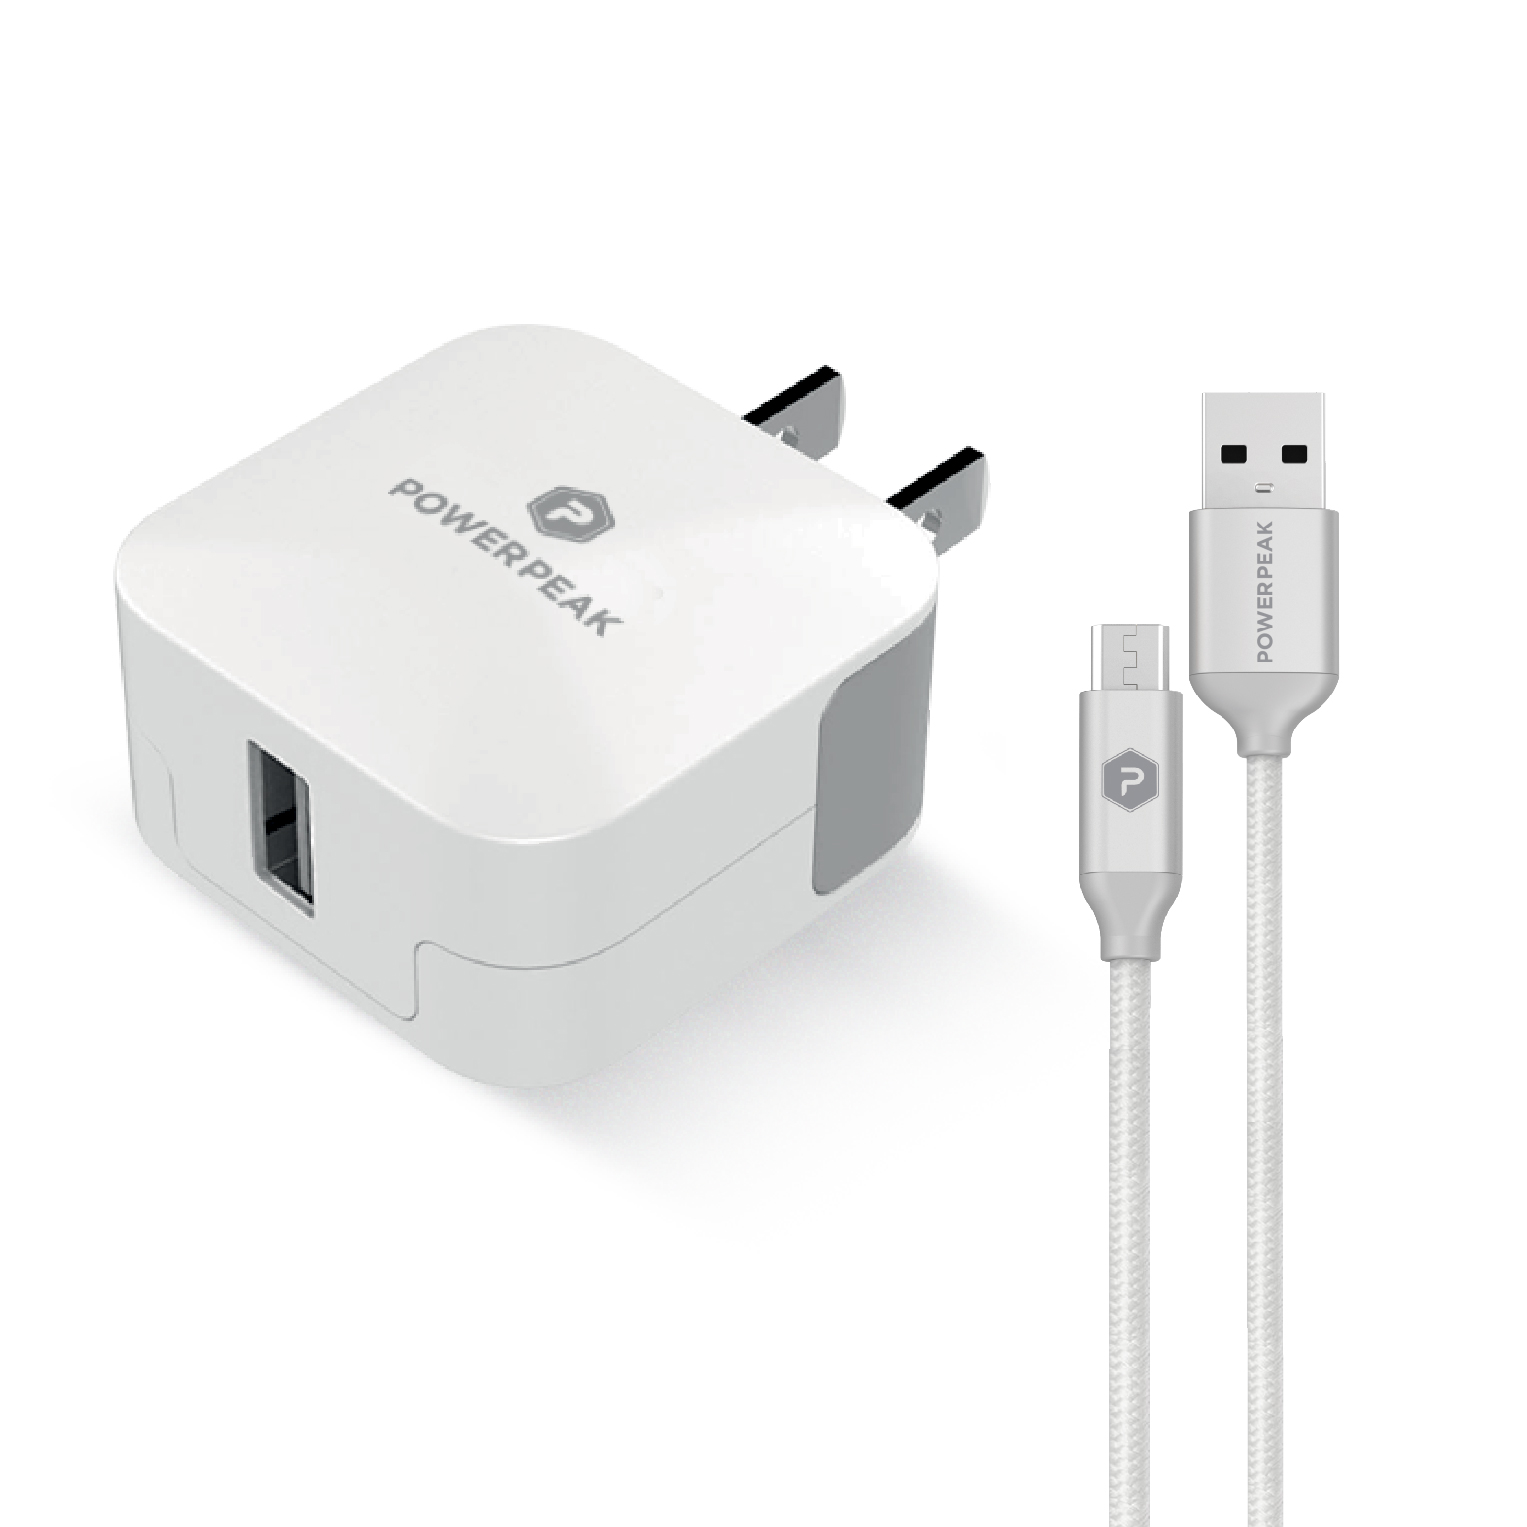 White rapid wall charger with braided Micro USB charge and sync cable of 6ft